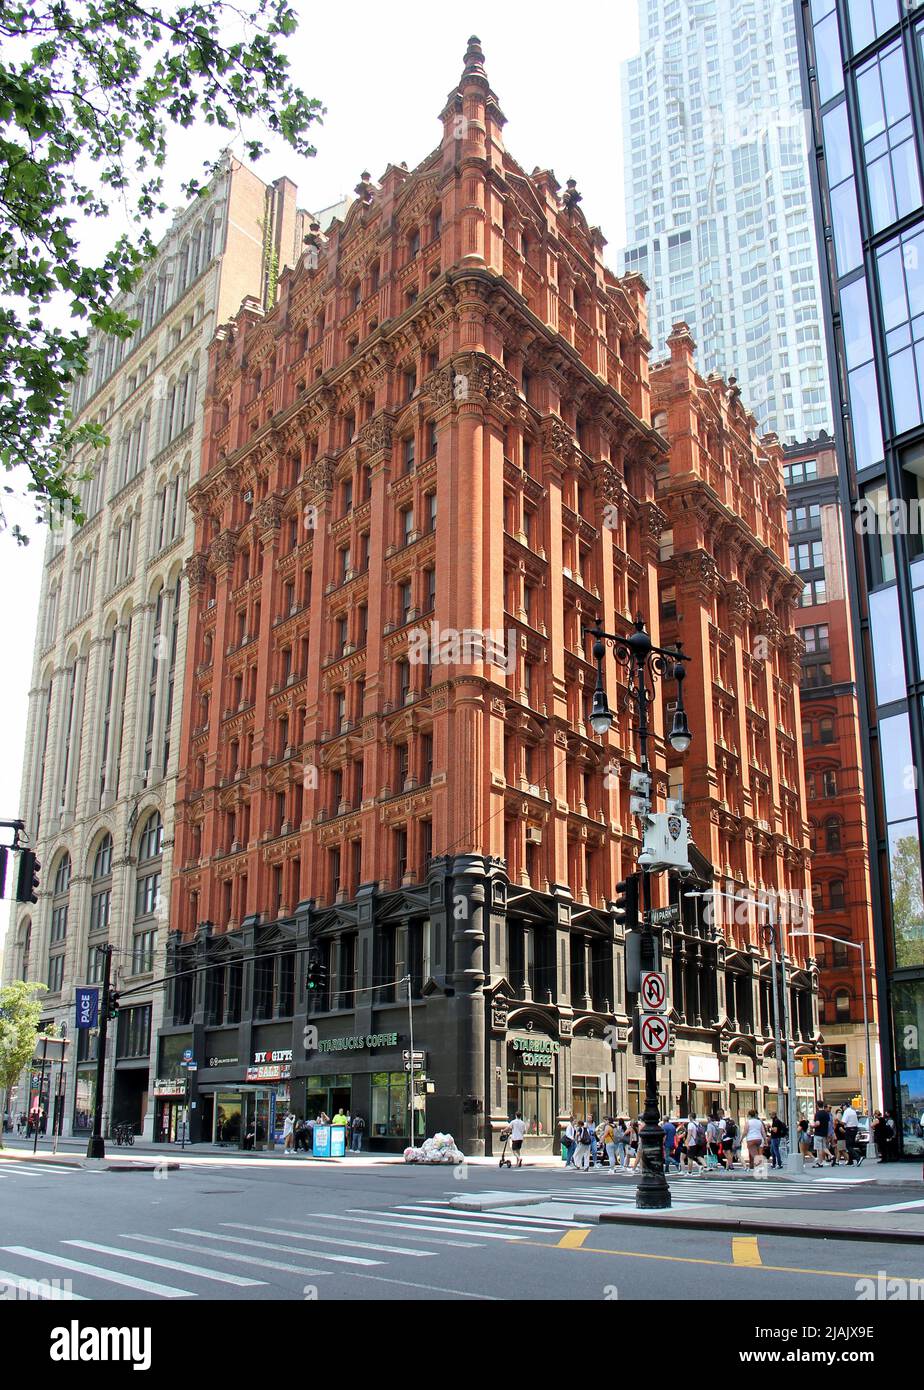 Potter Building, combination of the Queen Anne and Neo-Grec styles, erected between 1883 and 1886, in Lower Manhattan, New York, NY, USA Stock Photo